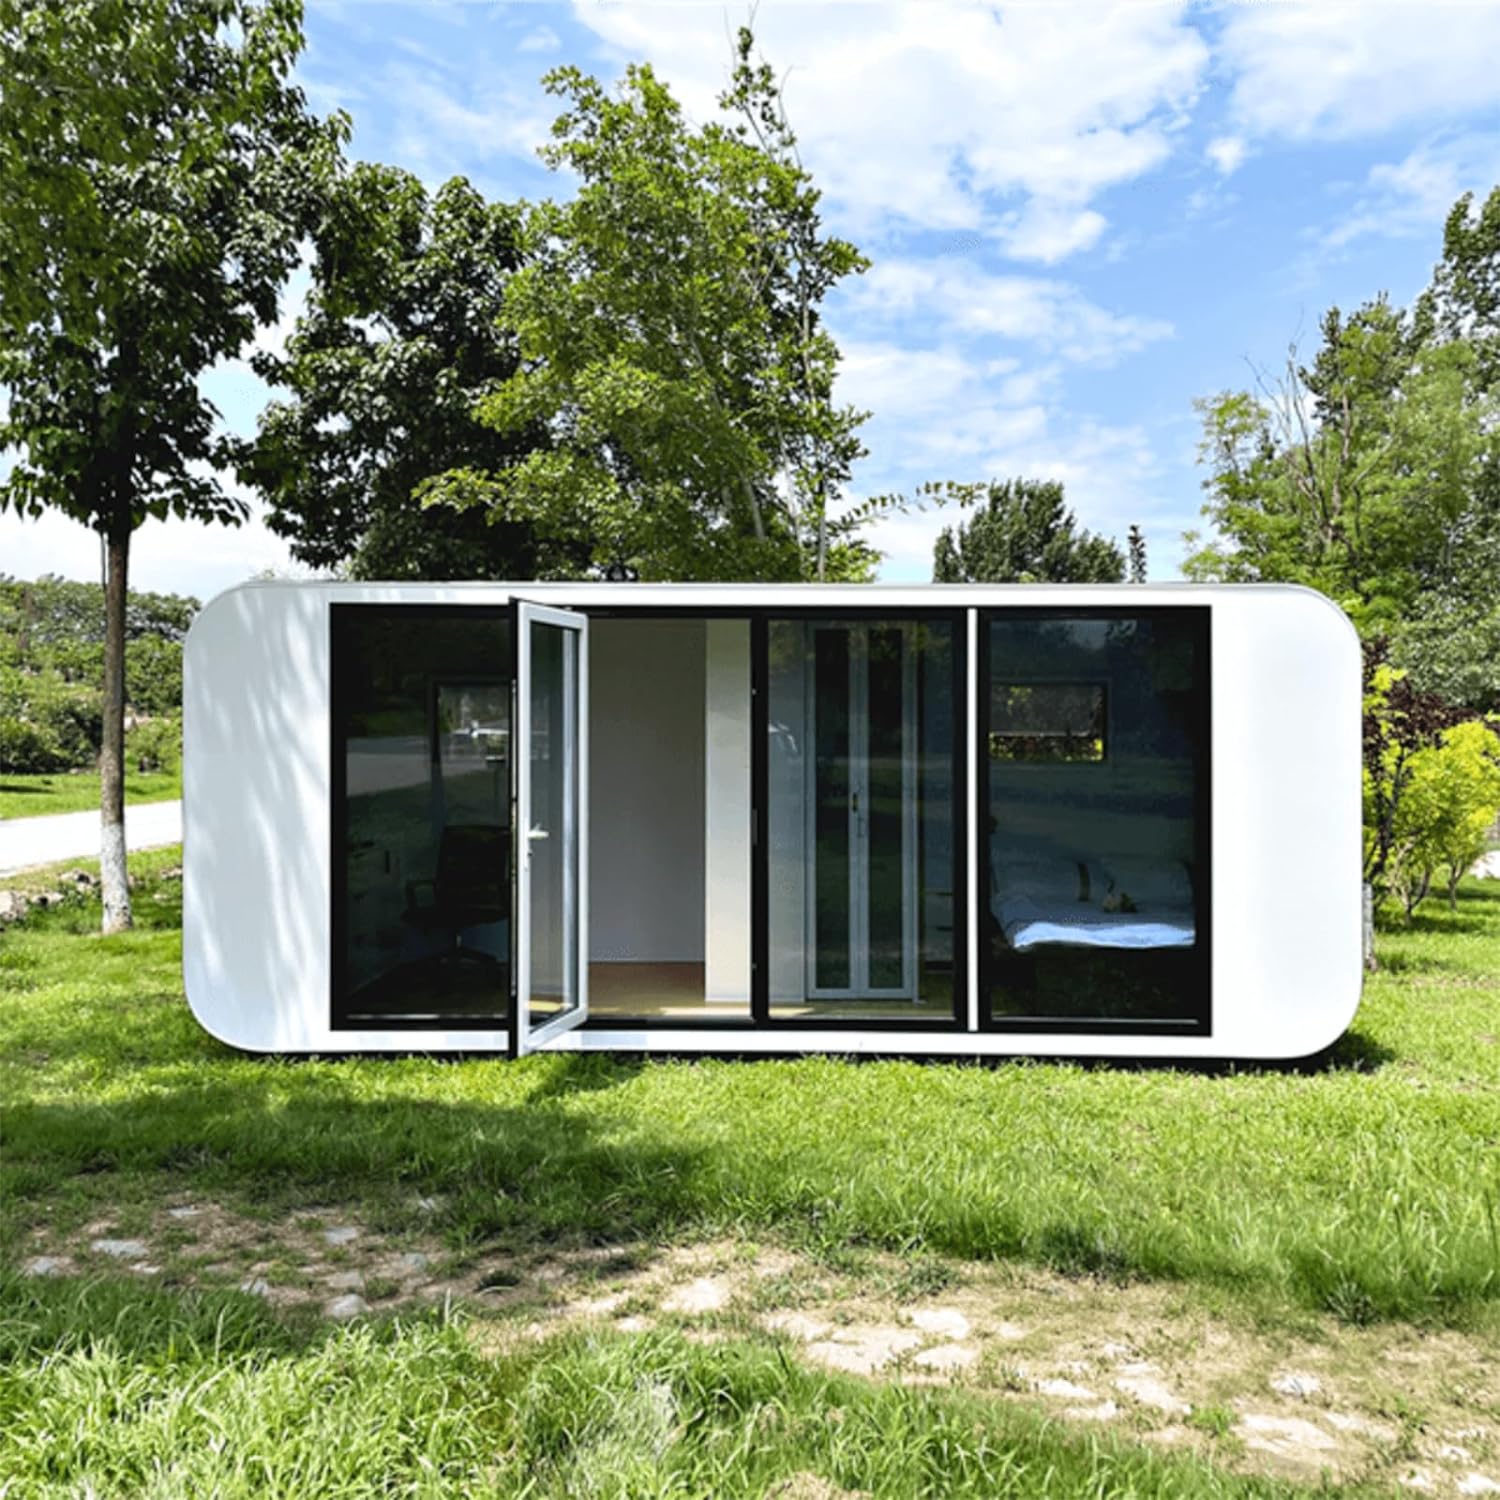 Chery Industrial 20ft Tiny House